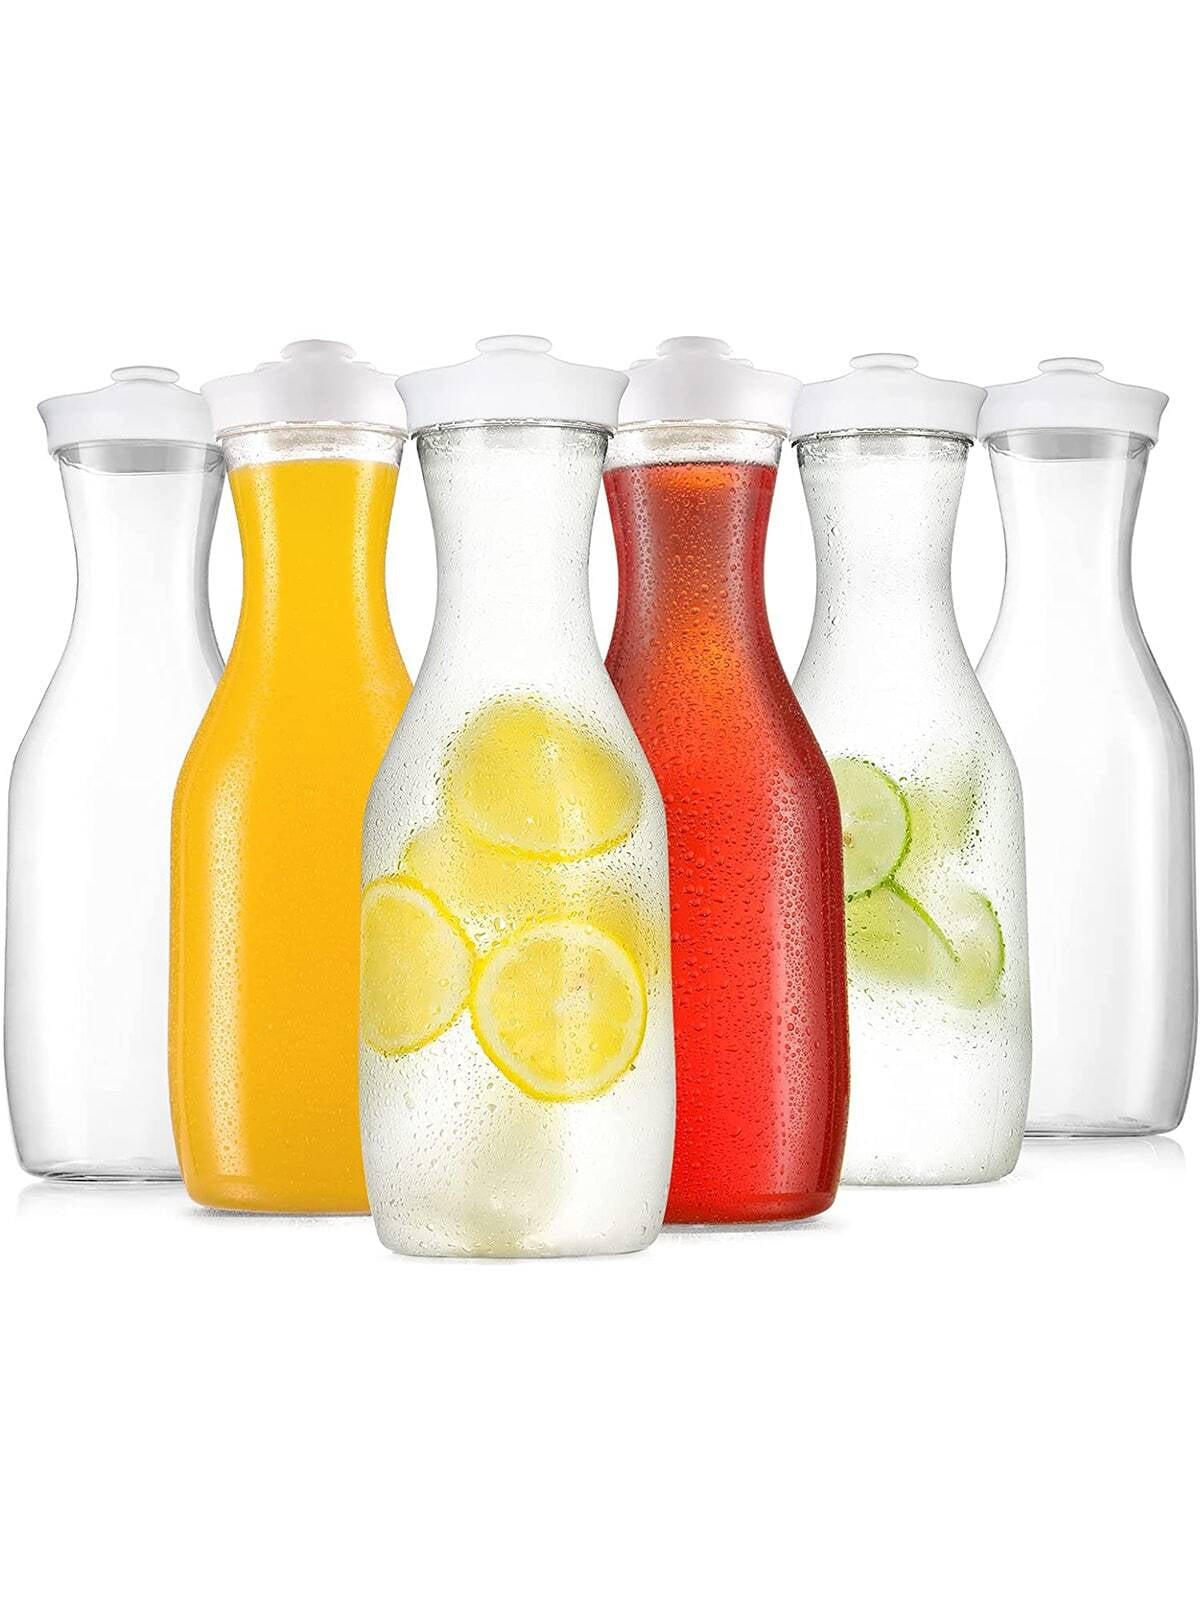 Set of 6 Large 50 Oz Water Carafes with Flip Top Lid, Clear Plastic Juice Containers, Beverage Pitcher BPA Free - for Various Drinks - Hand Wash Only